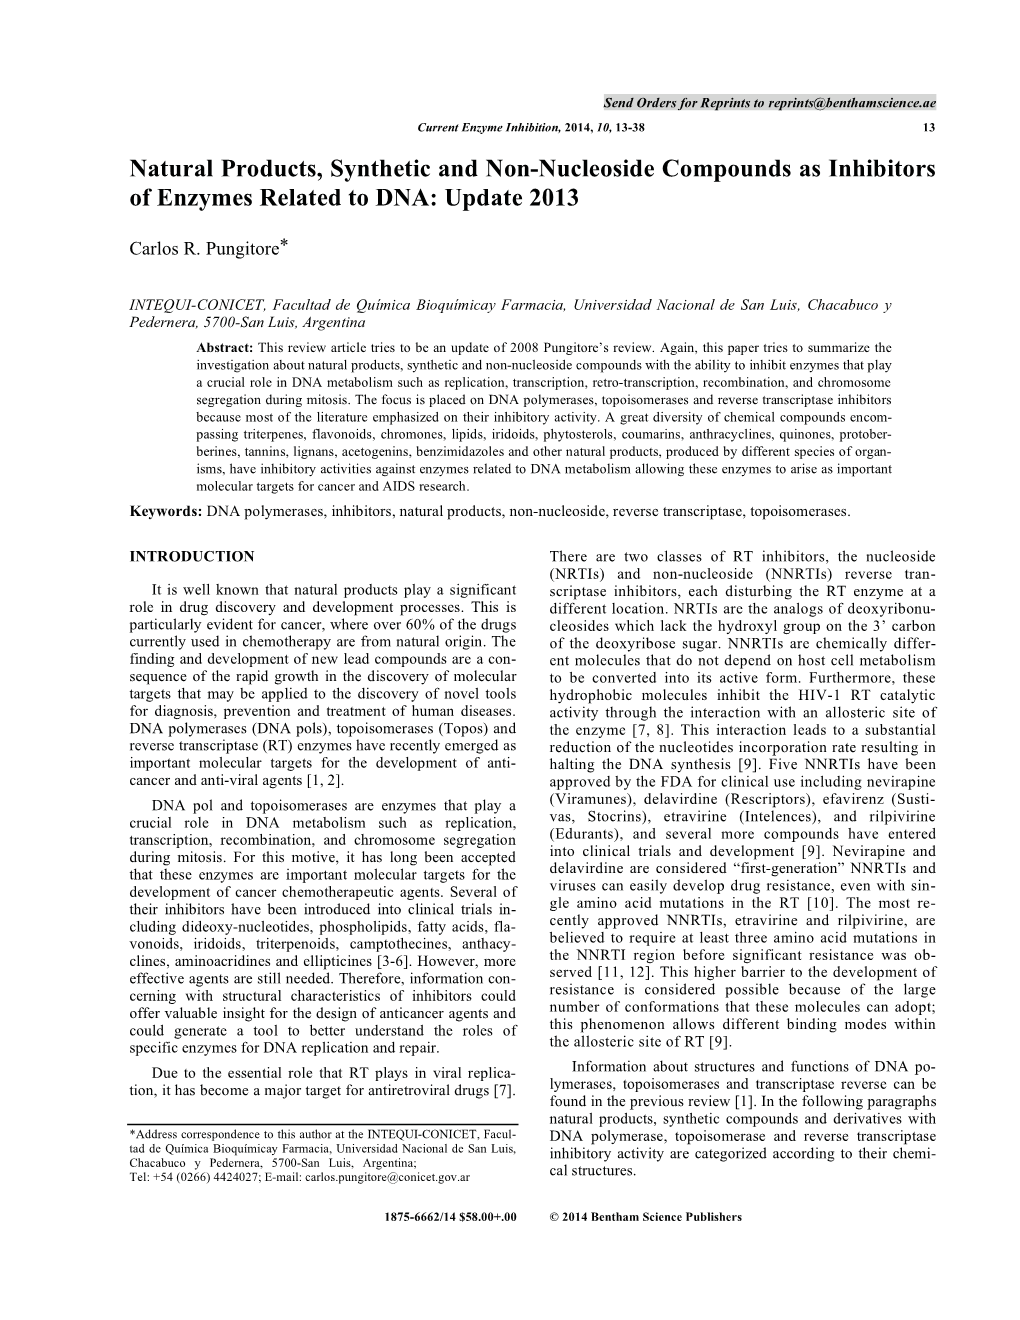 Natural Products, Synthetic and Non-Nucleoside Compounds As Inhibitors of Enzymes Related to DNA: Update 2013